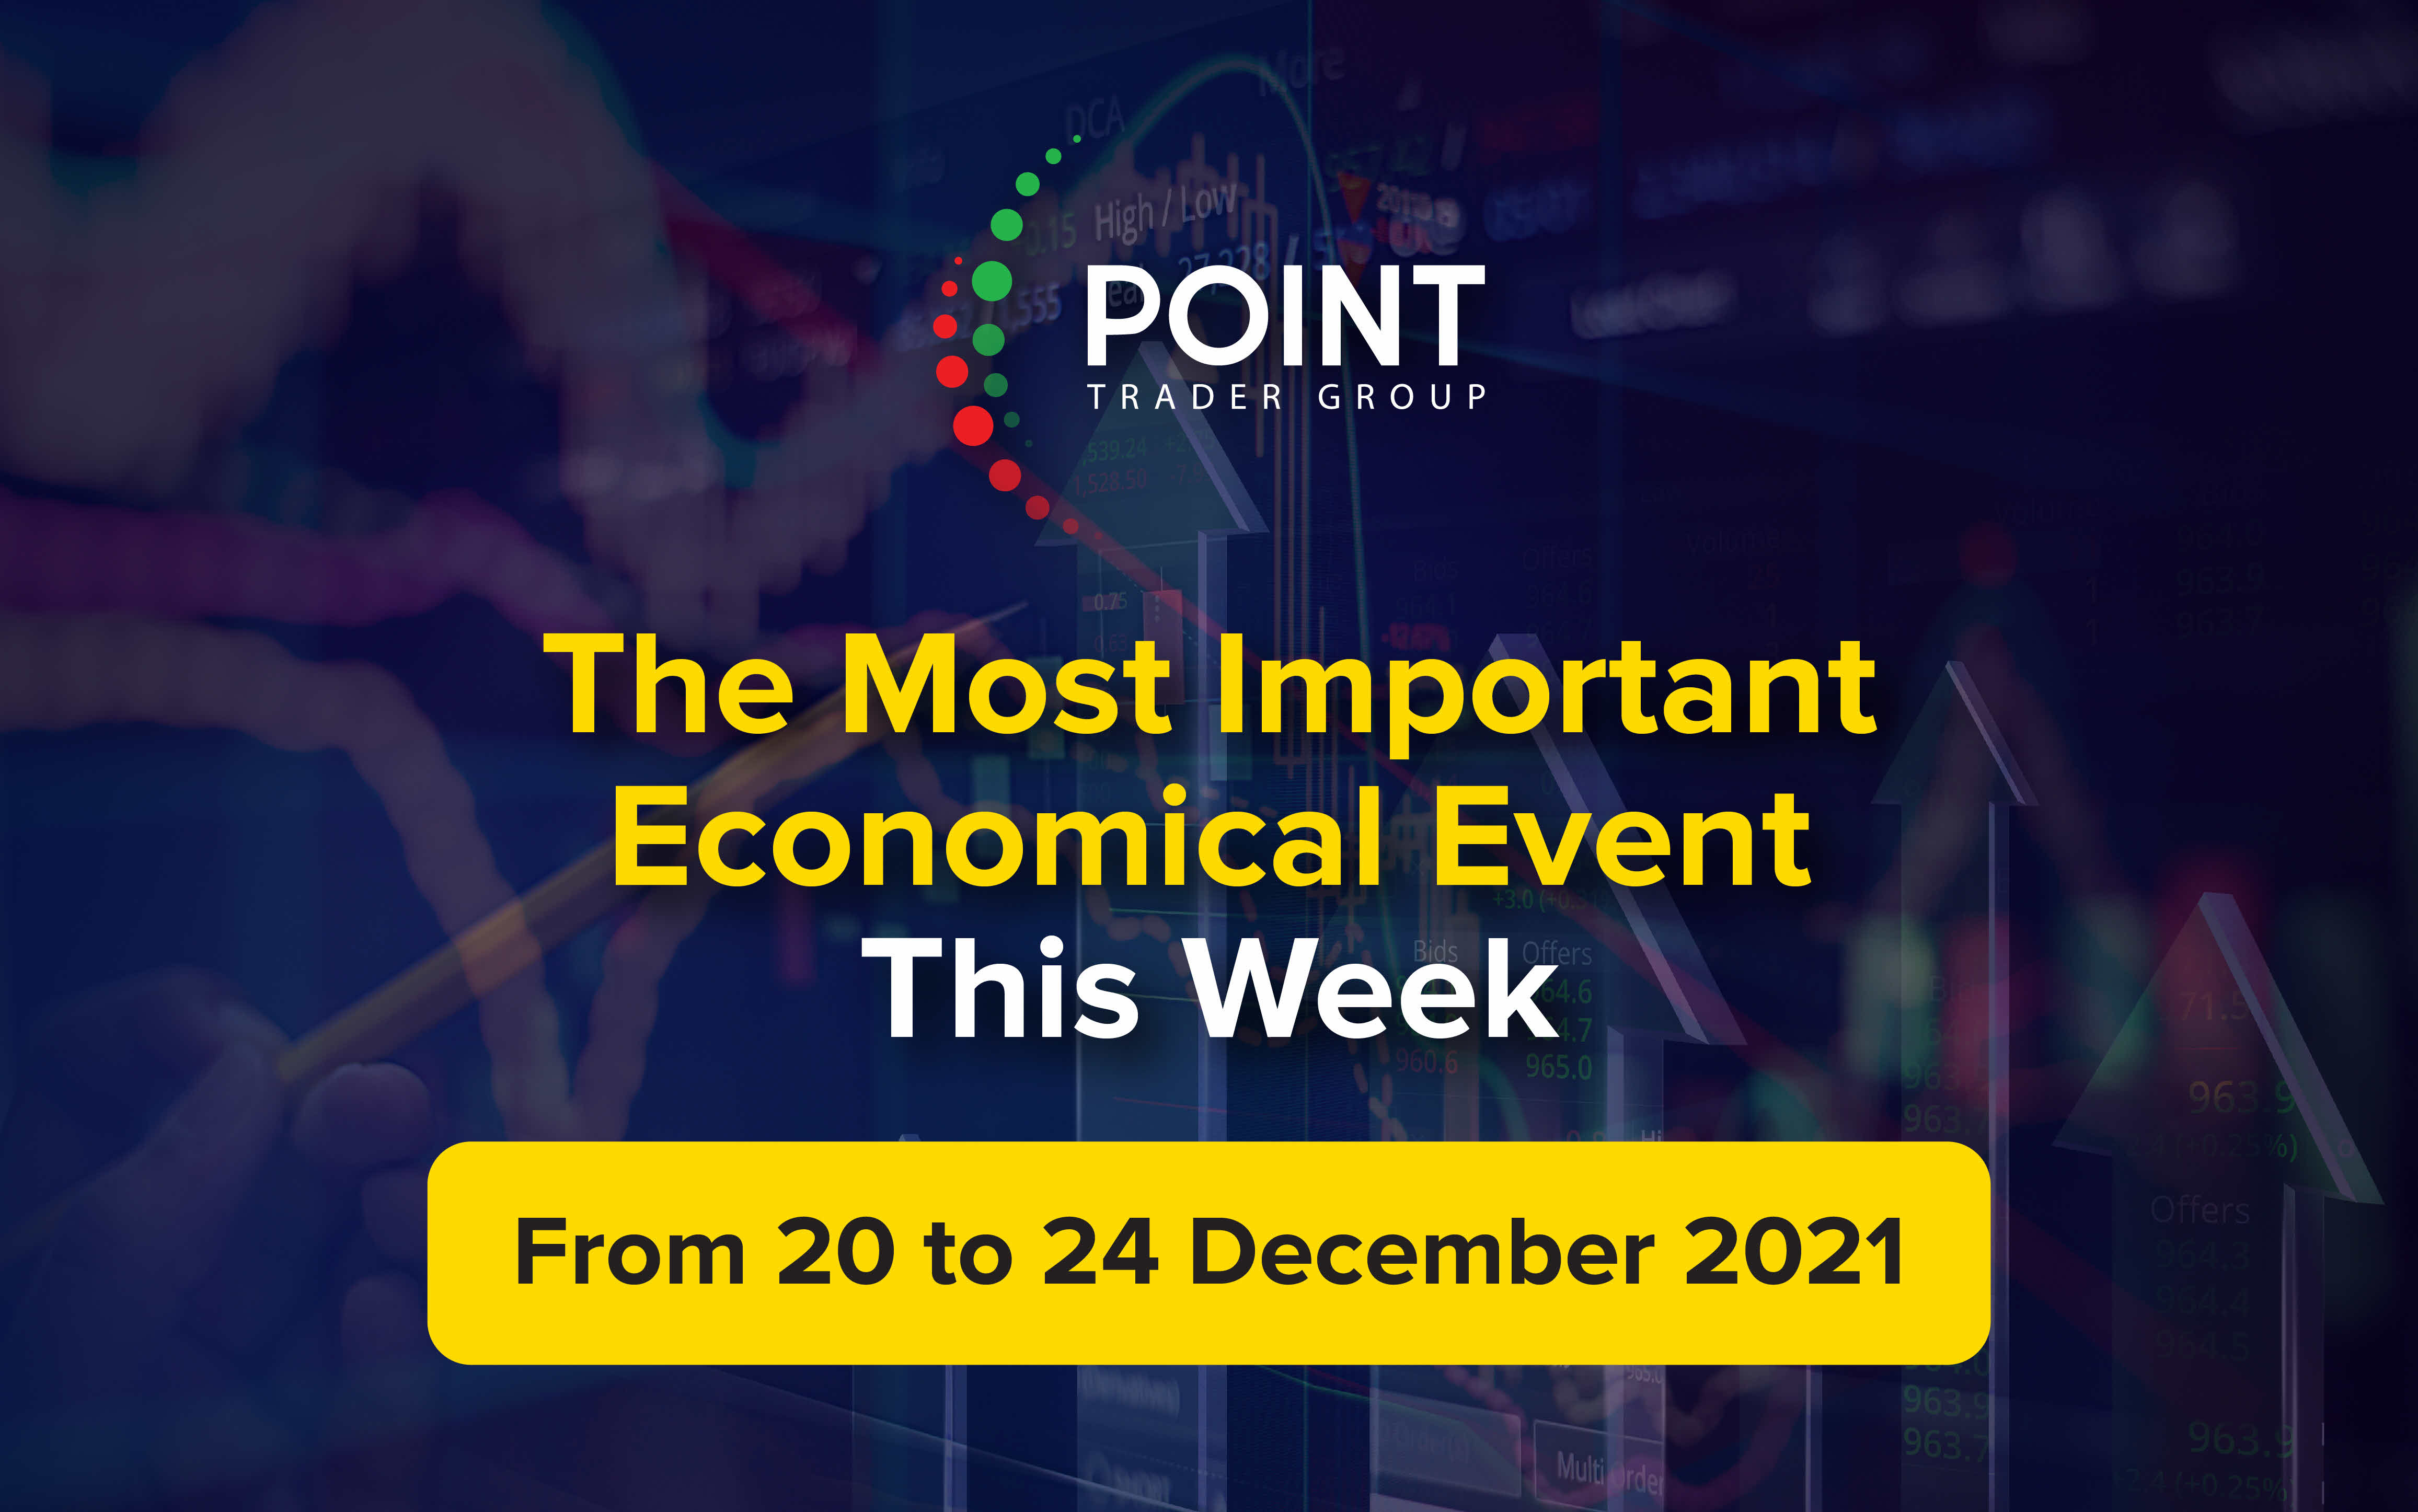 The most important Economic events this week from the 20th to the 24th of December 2021